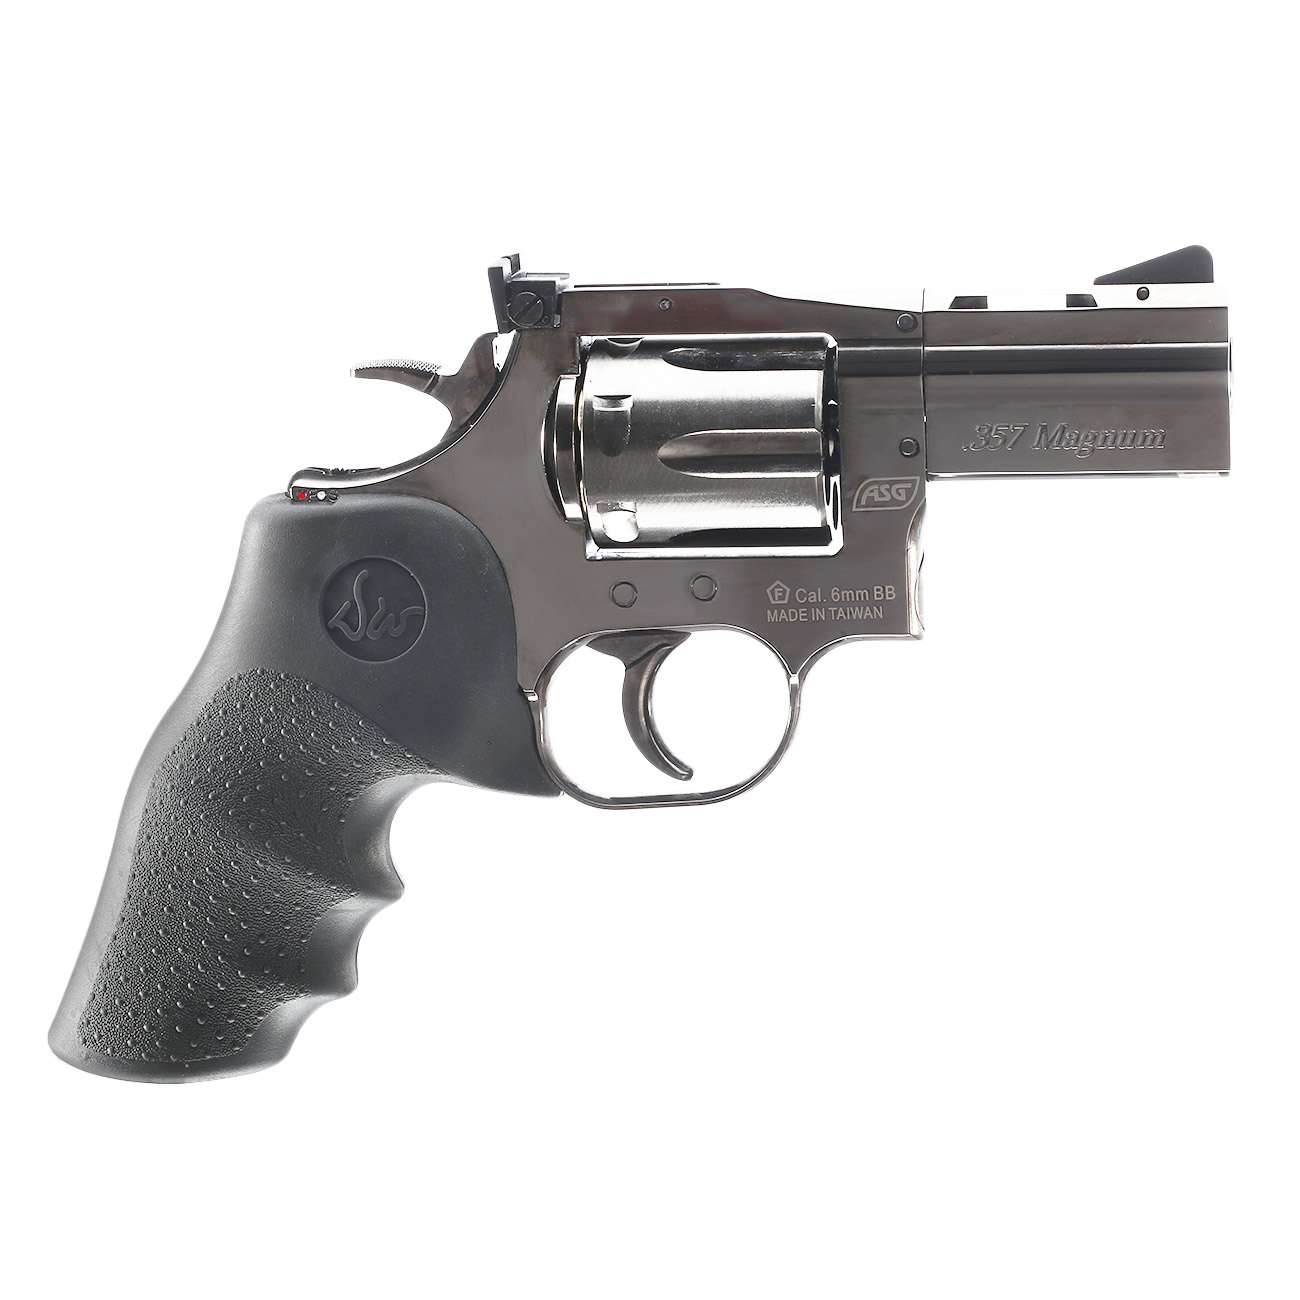 ASG 2.5 inch Dan Wesson Revolver 6 mm BB 1.2 Joules - stalowoszary